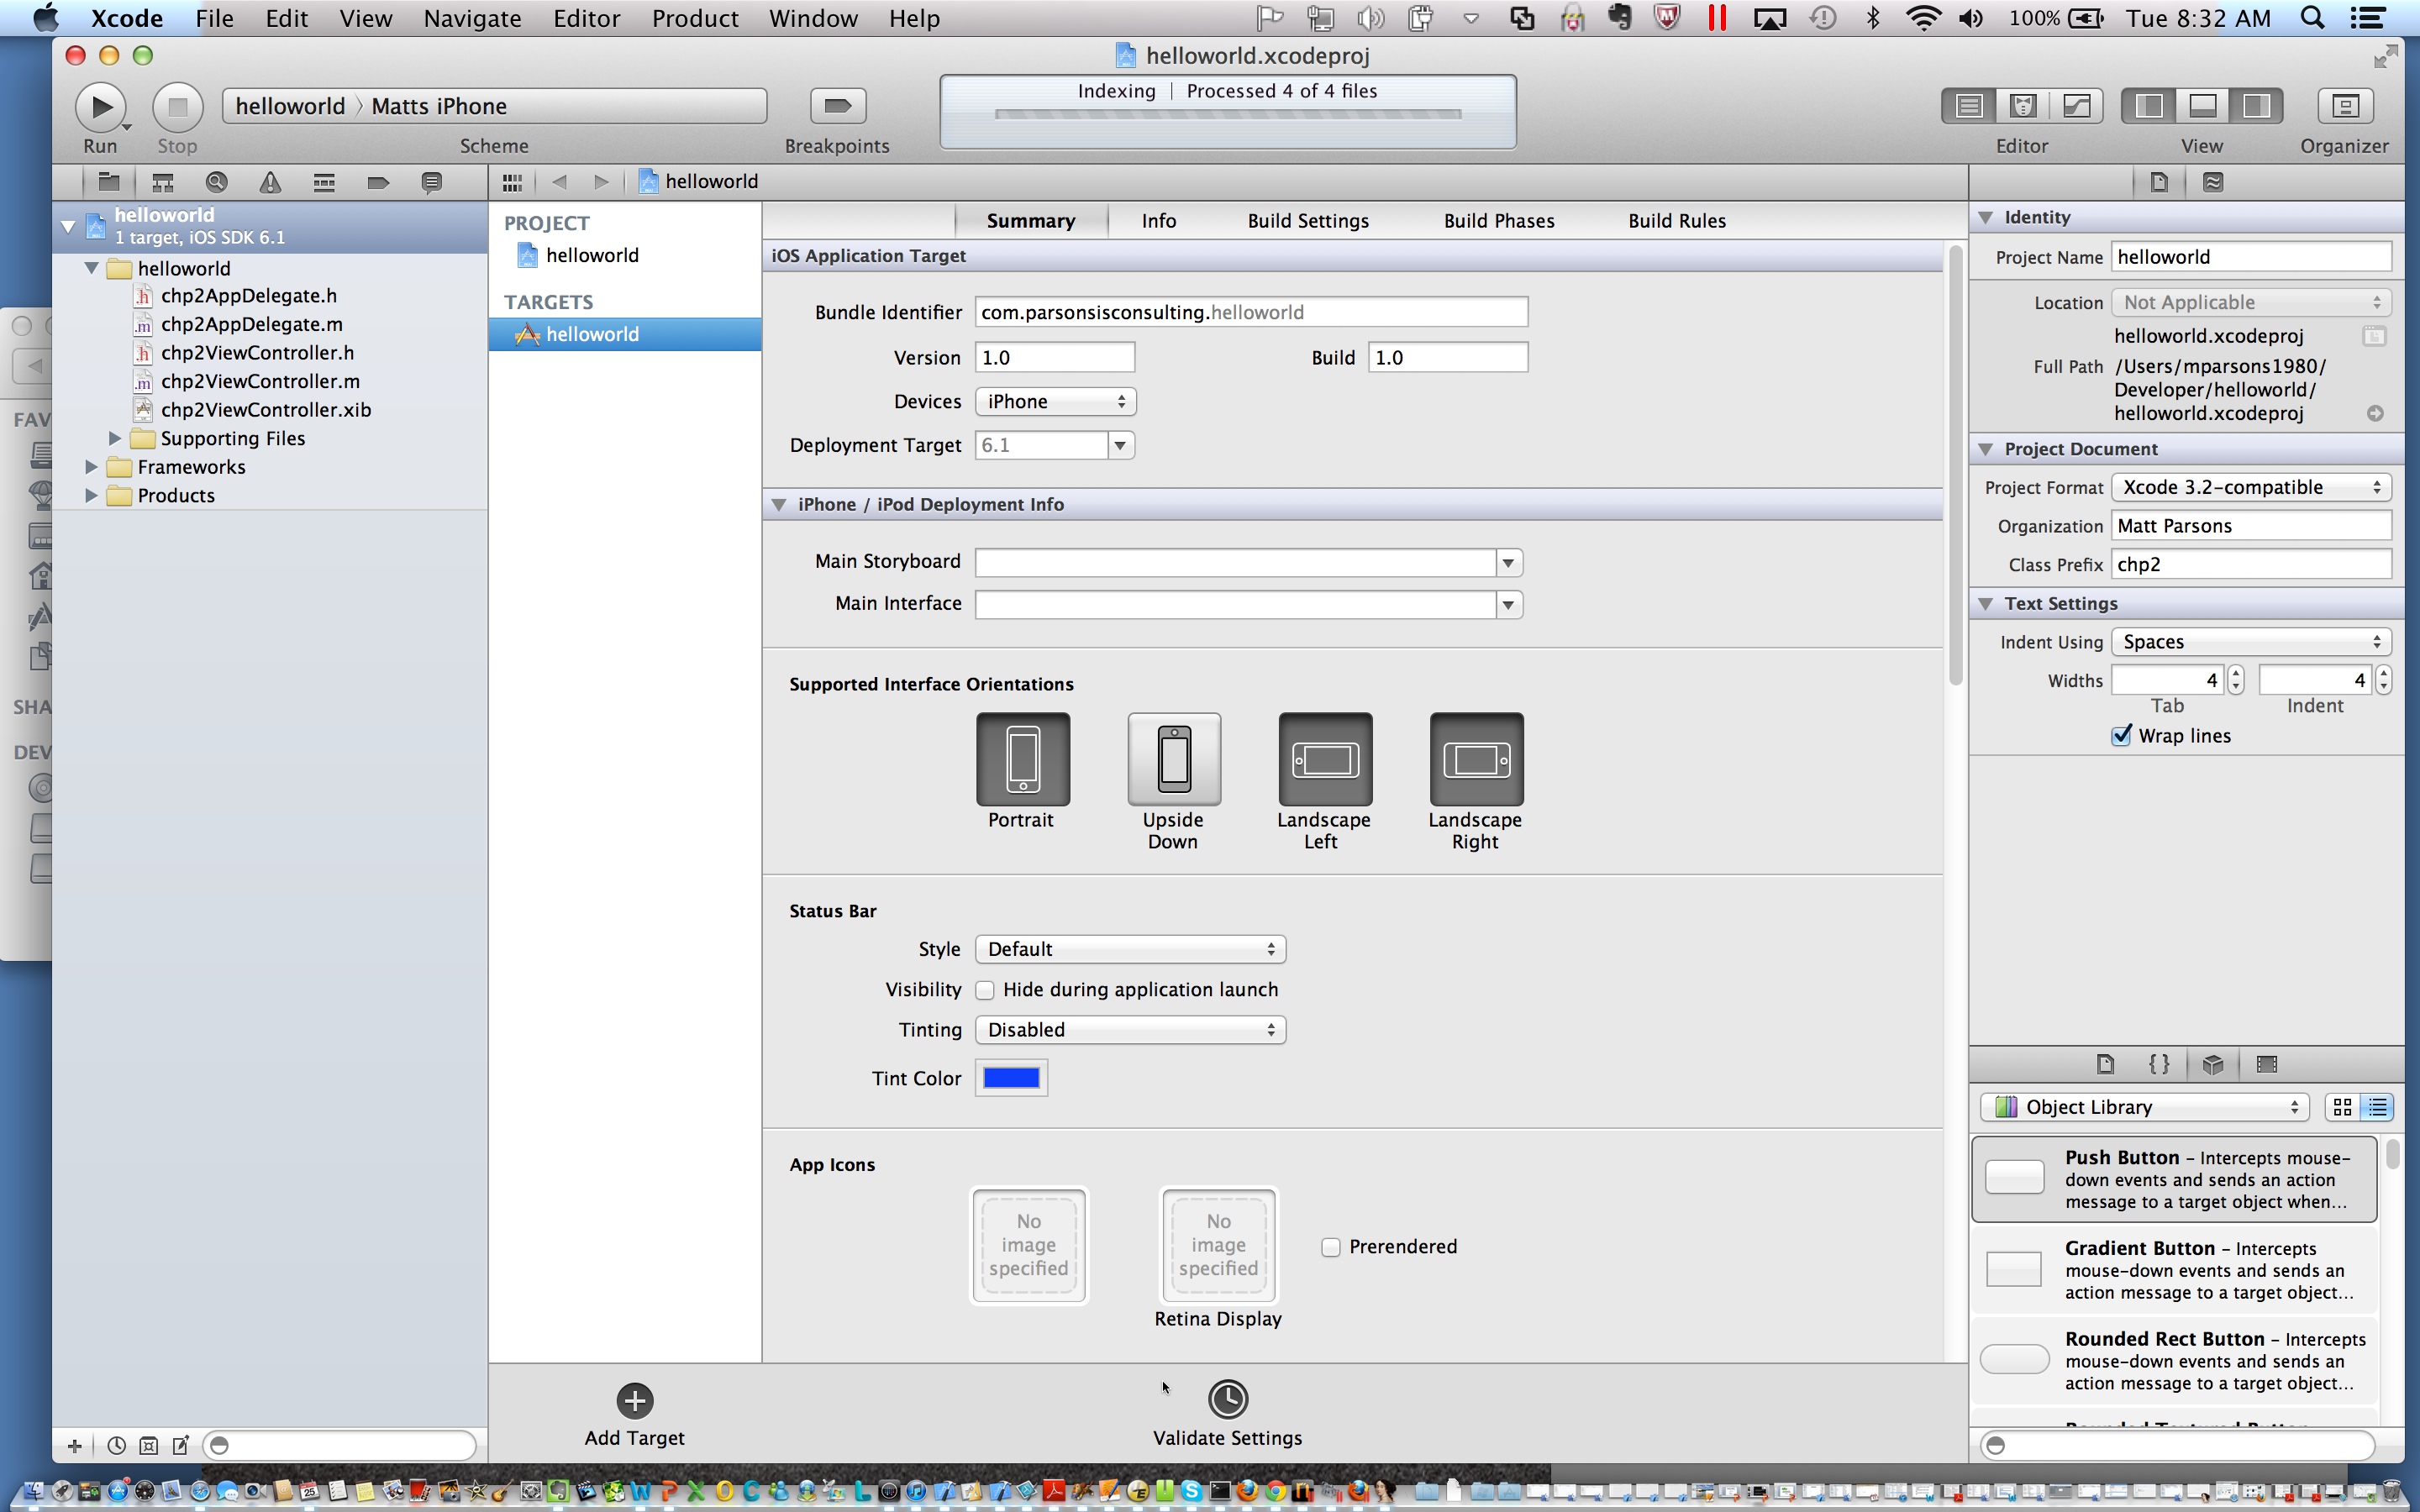 Interface Builder Xcode. Technical Guide Builder Интерфейс. IPAD Simulator Xcode. Validate settings Xcode. Target object